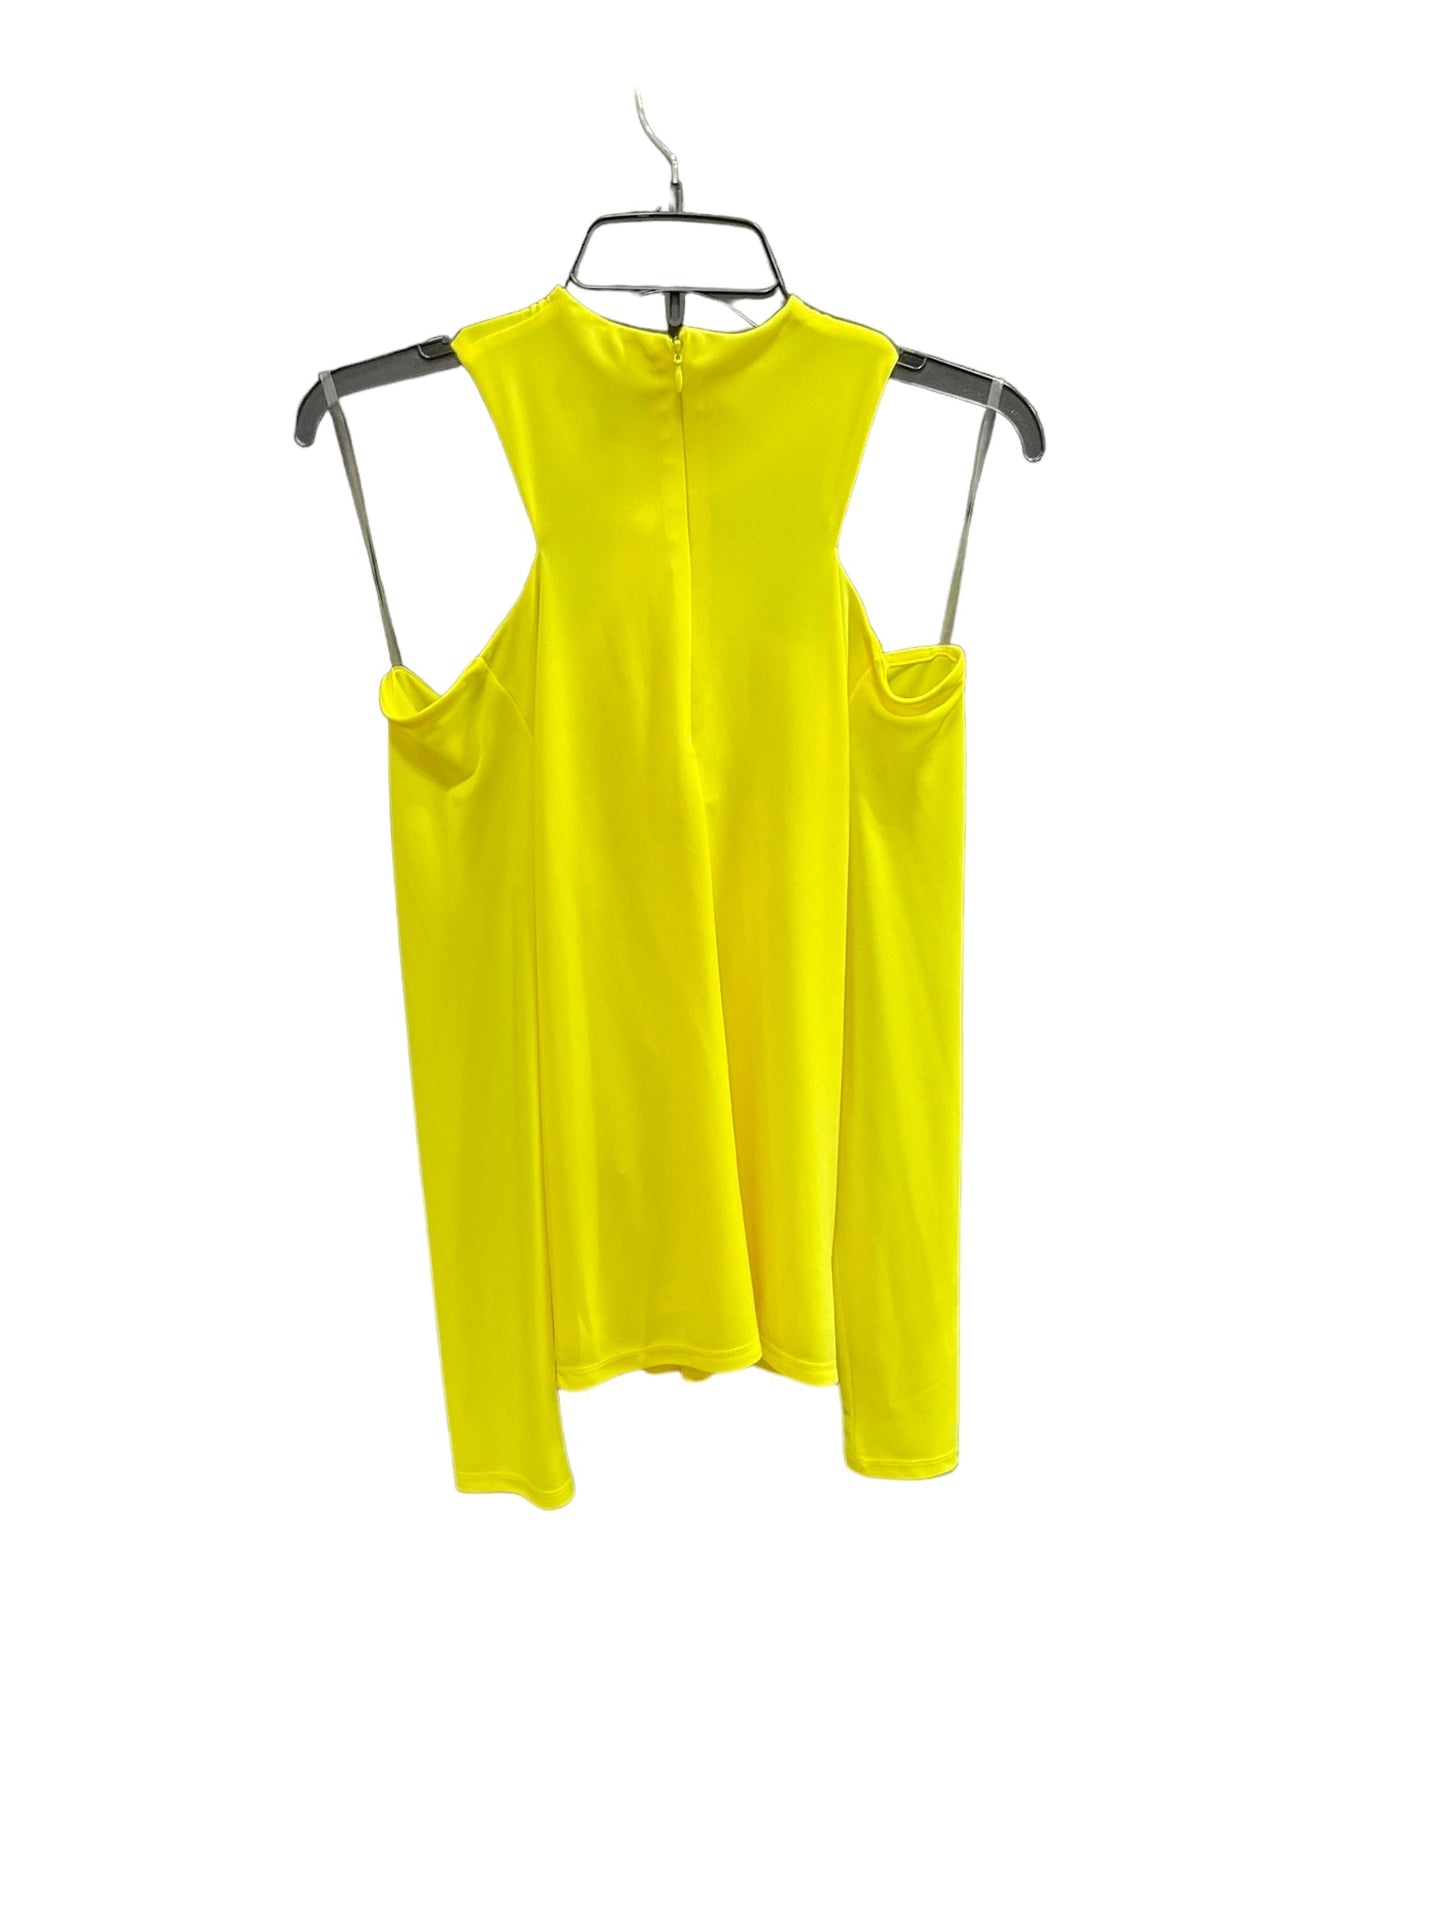 Yellow Top Long Sleeve Inc, Size M